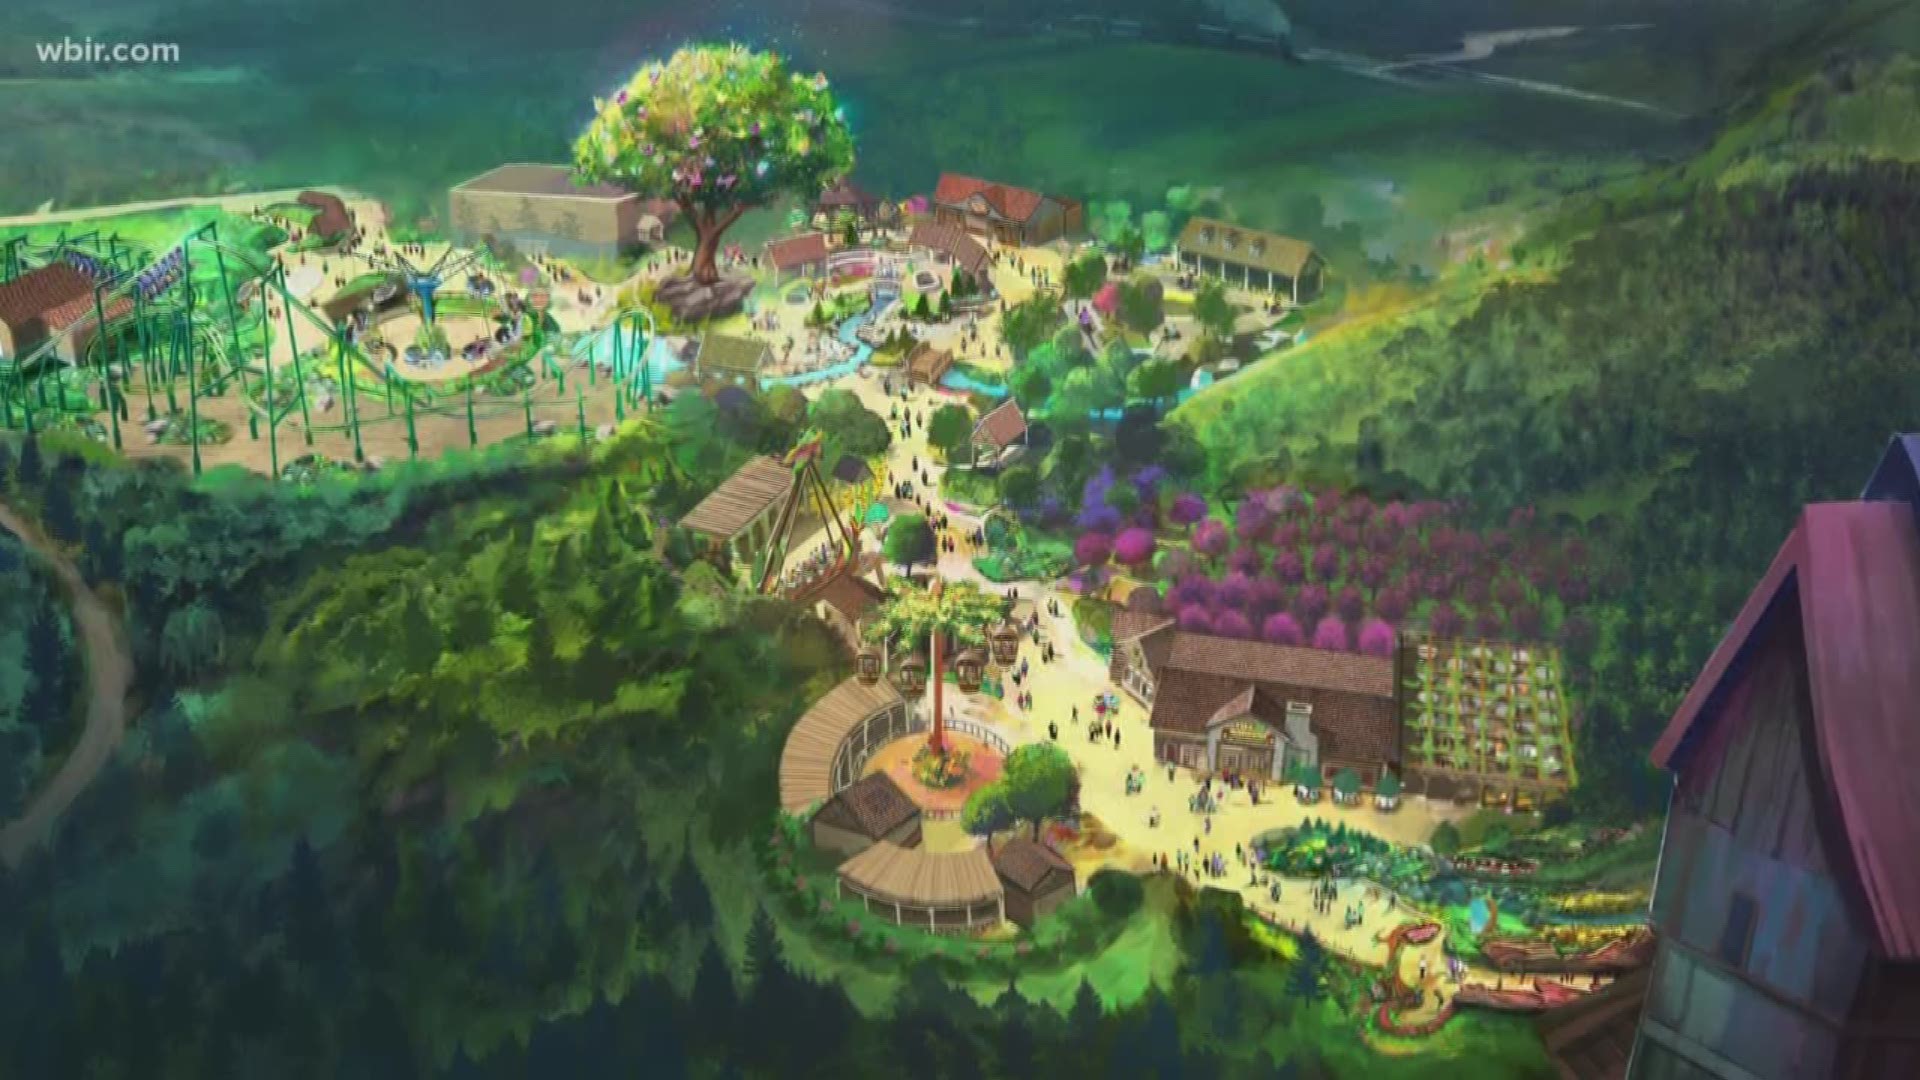 It's still under construction, but Dollywood is hoping the new Wildwood Grove expansion will be the perfect place for family fun for Dolly Parton's East Tennessee theme park.